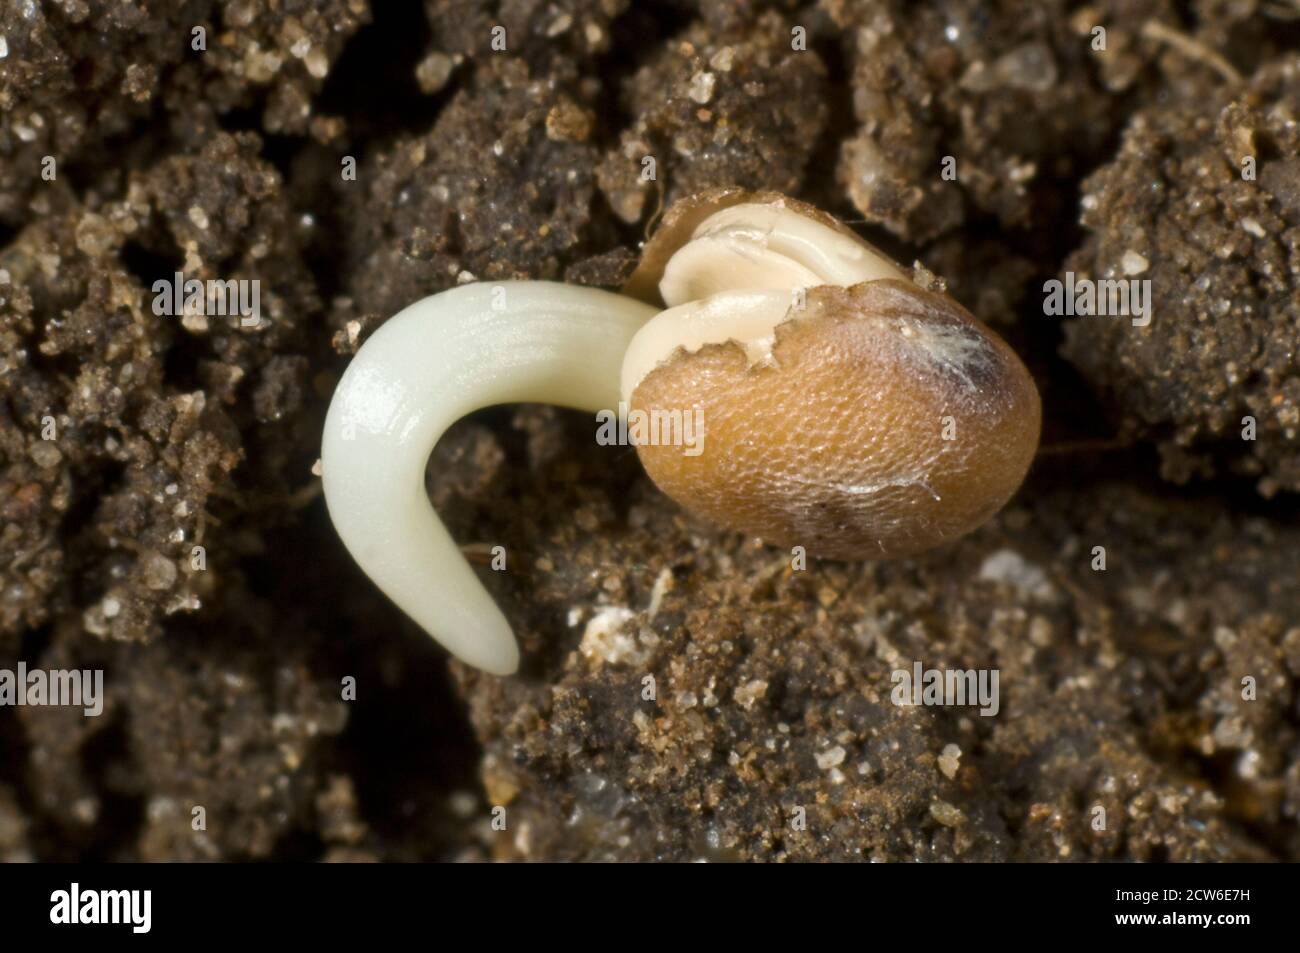 Photomicrograph of a radish seed (Raphanus raphinistrum subsp. sativus) seed germinating with radicle (embryo root) developing Stock Photo